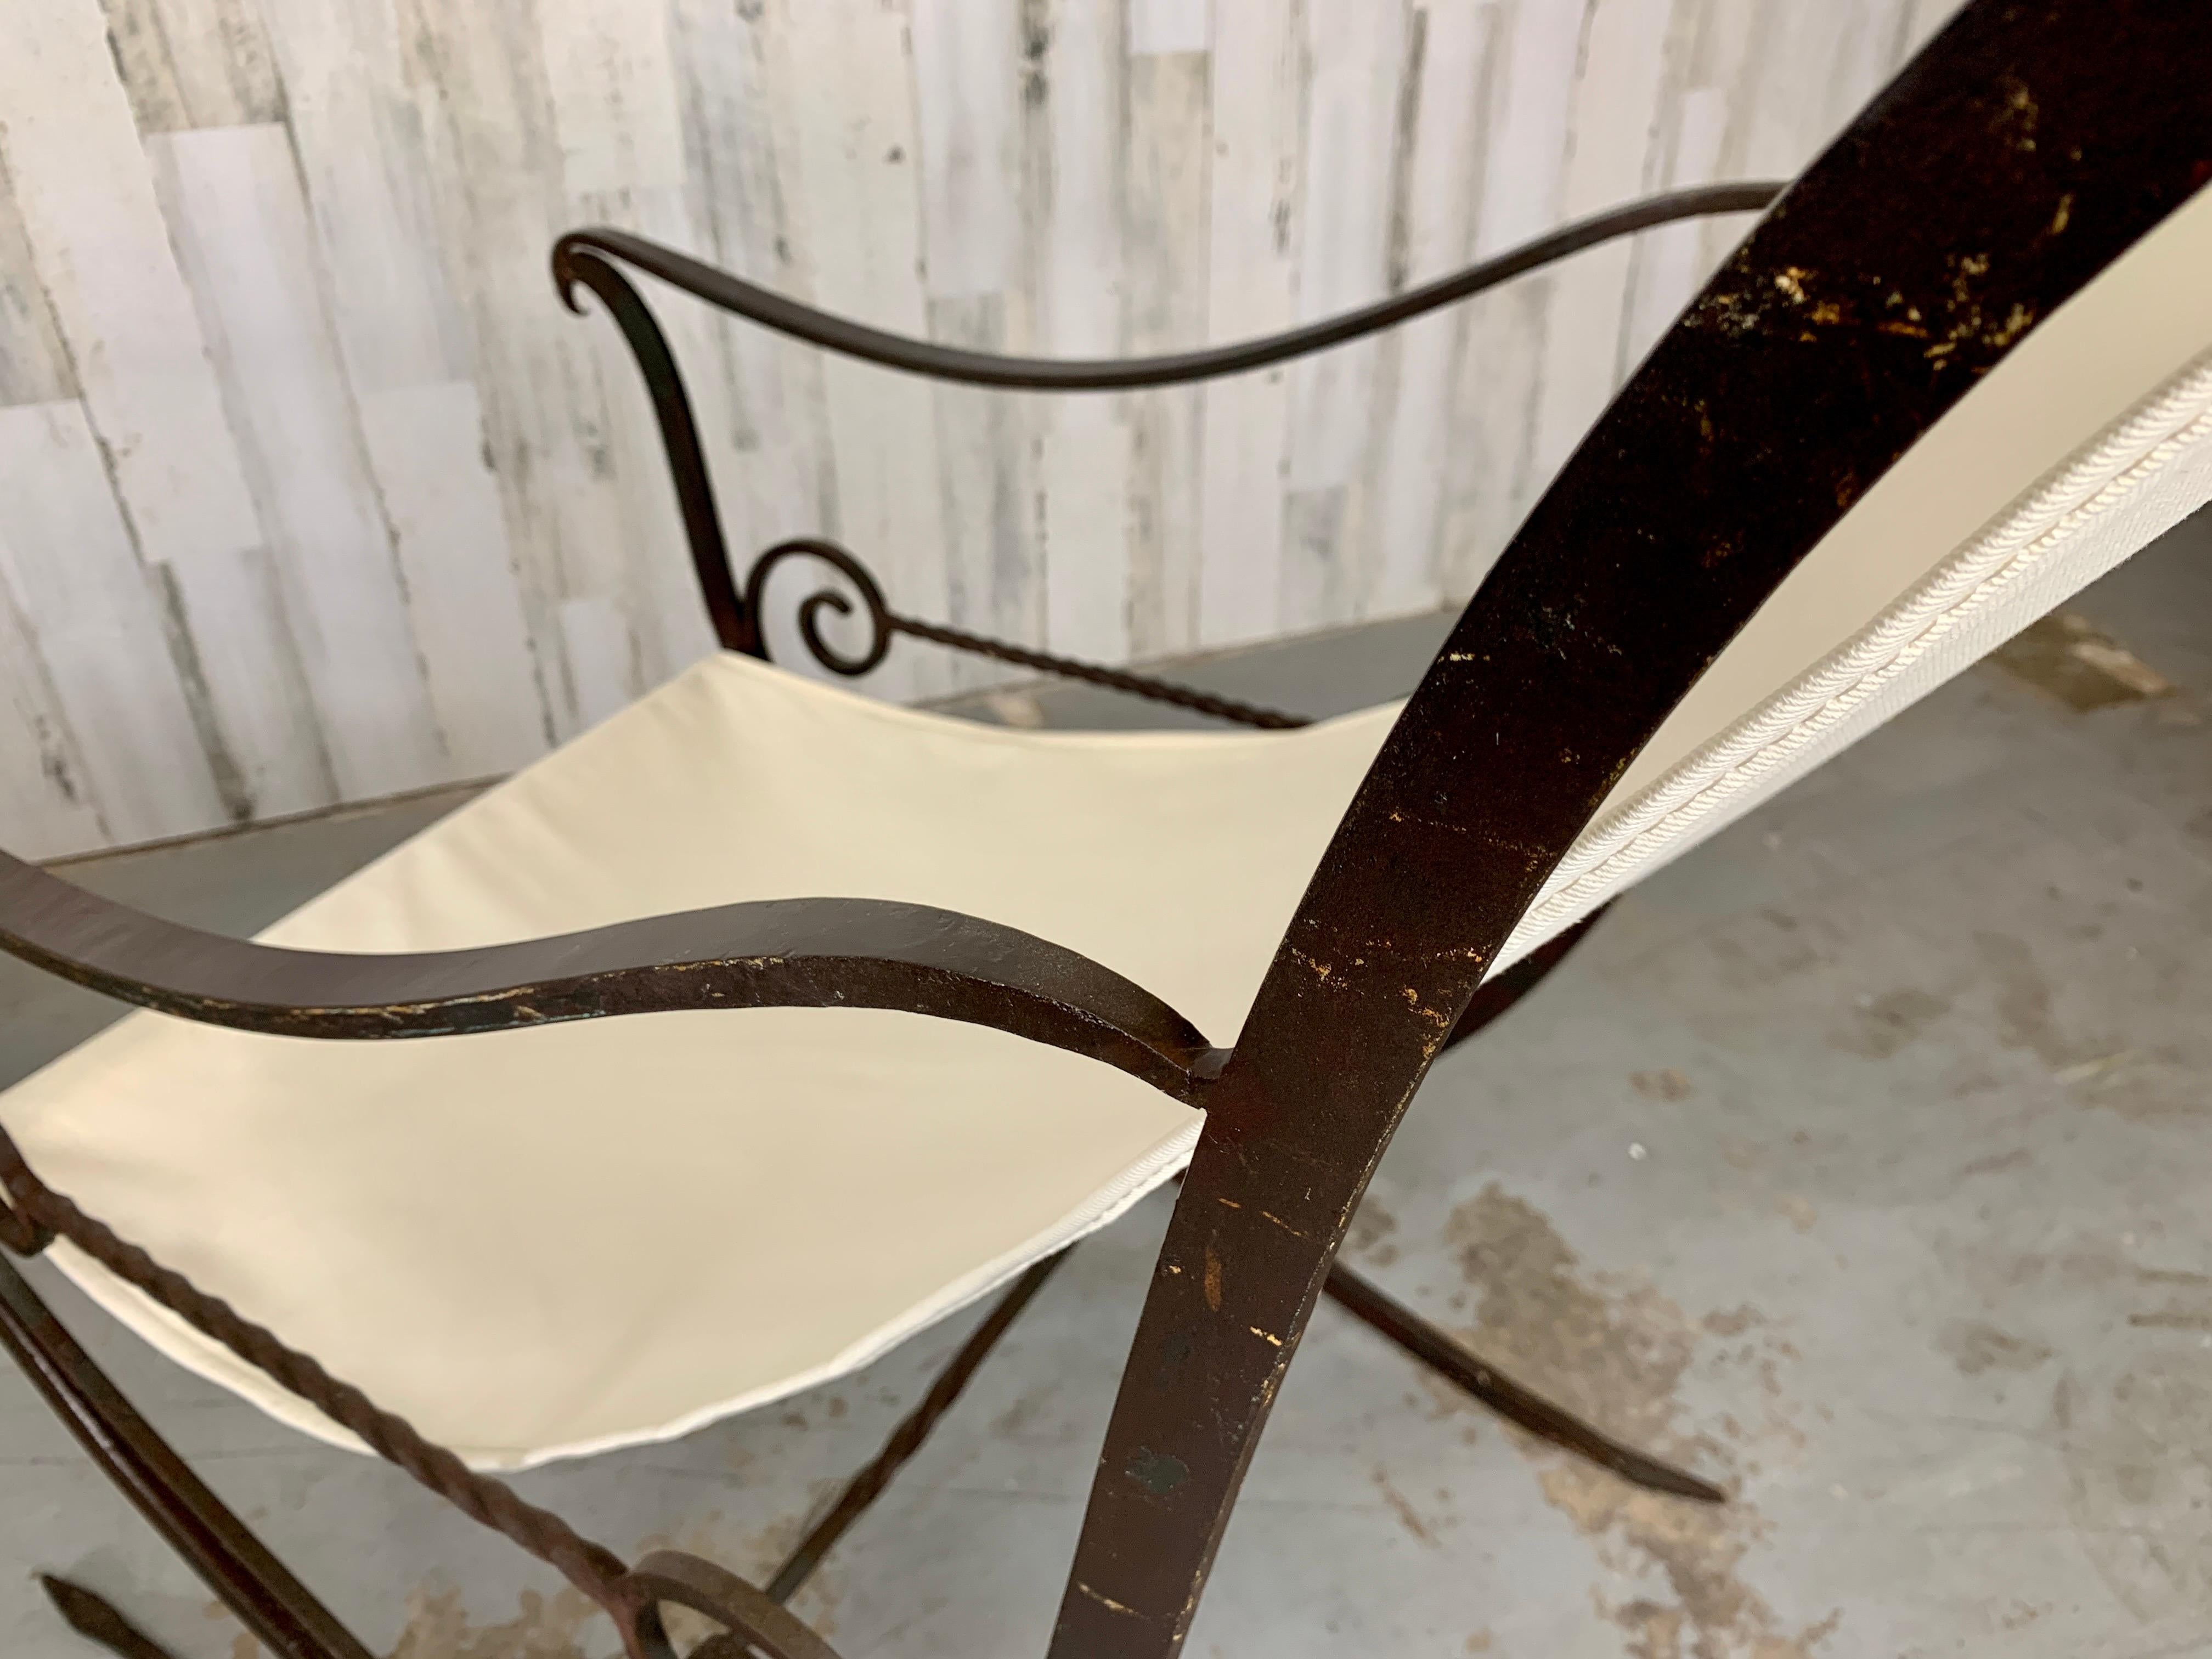 Sculpted Forged Iron Sling Chairs, 1940's For Sale 11